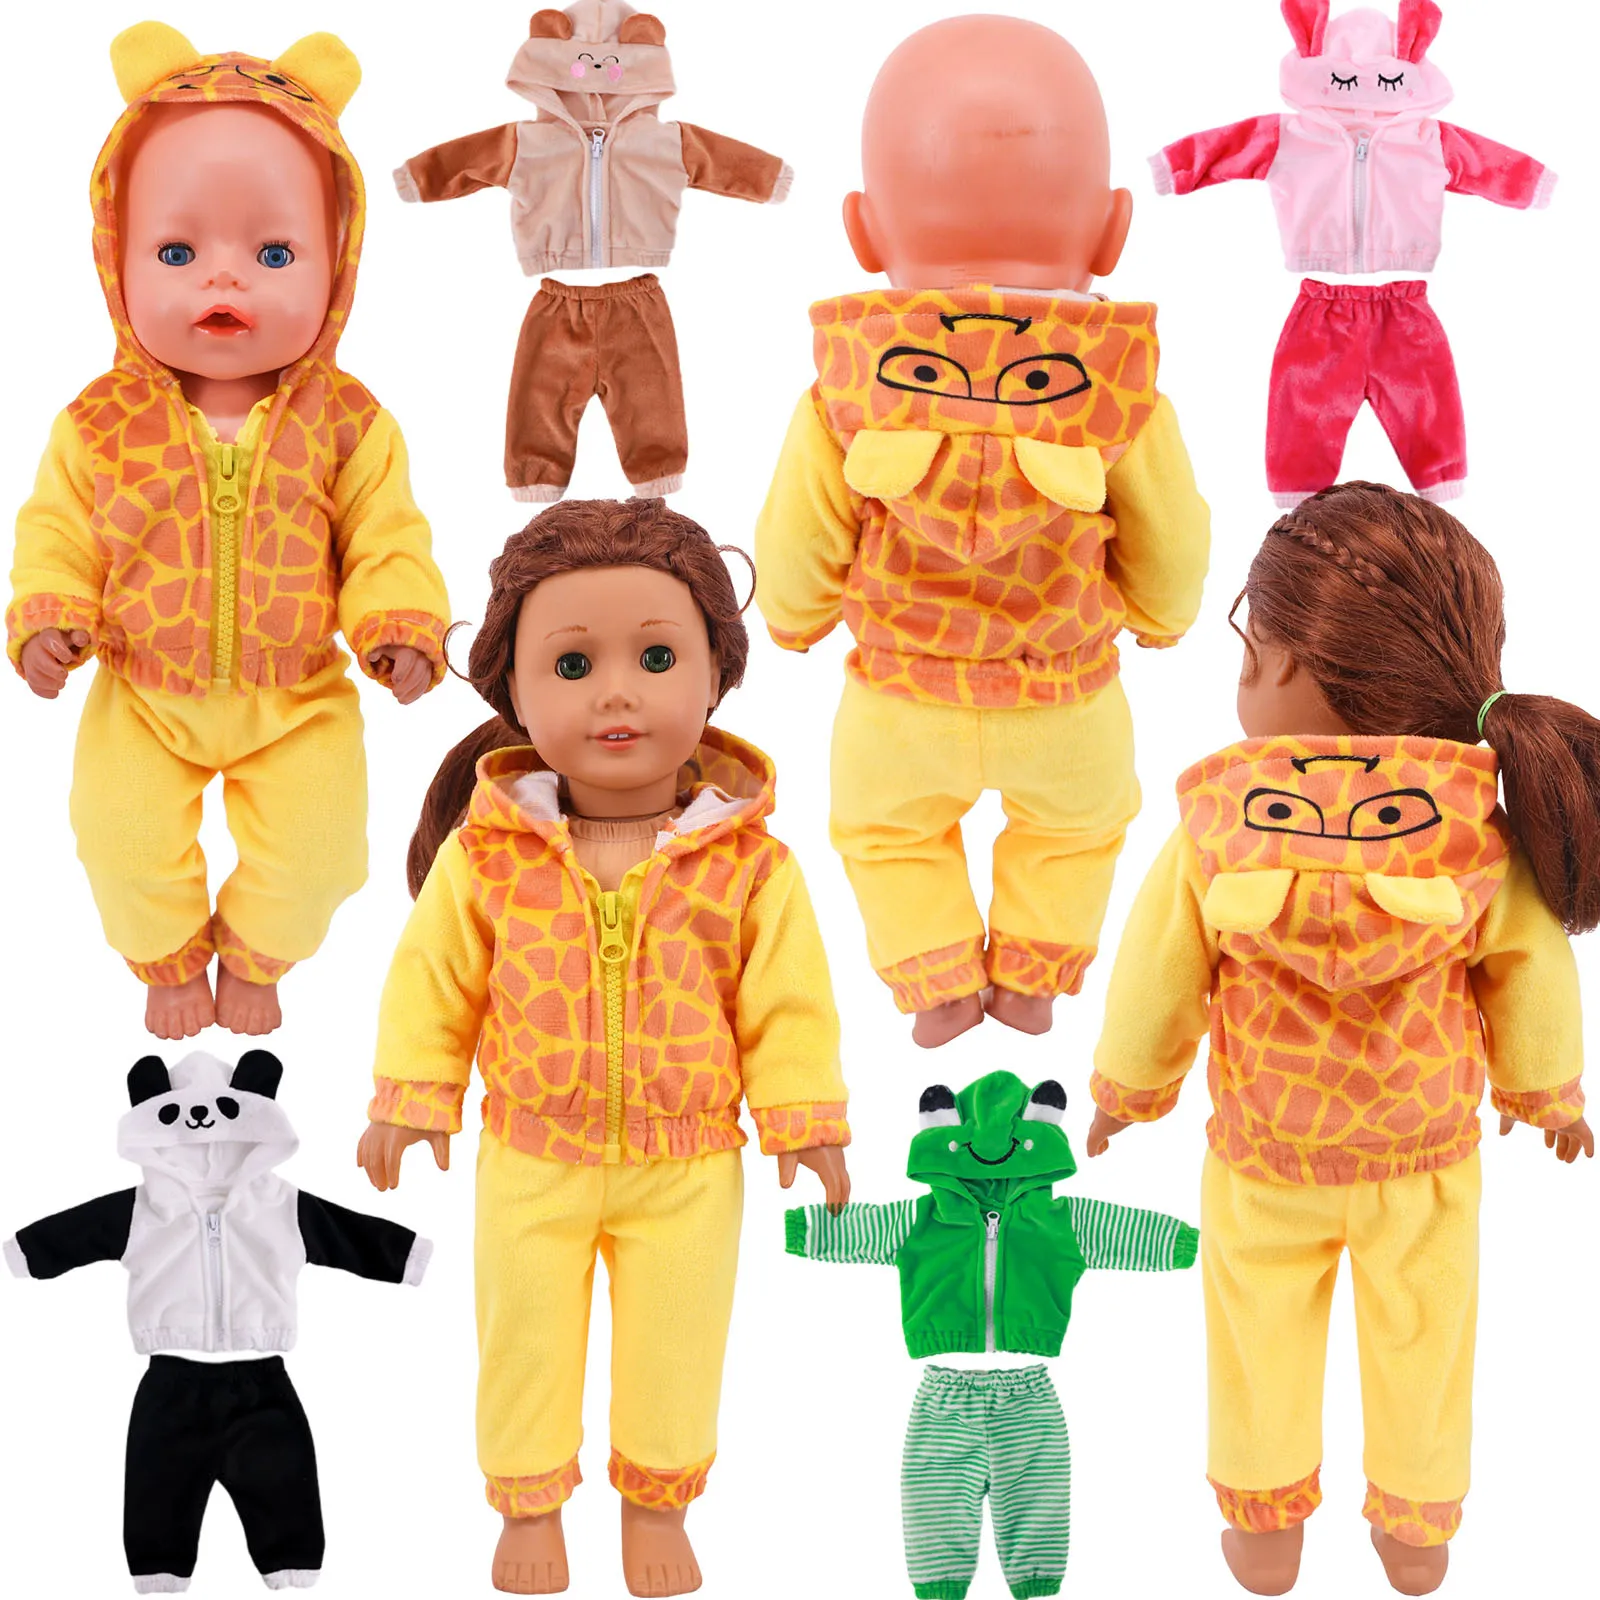 Doll Clothes Pajamas Cute Animal Warm Suit For 18Inch American Doll&43Cm Born Doll For Generation Accessories,Toys For Children 18inch doll red sweater suit children s toy doll accessories children s birthday giftc692